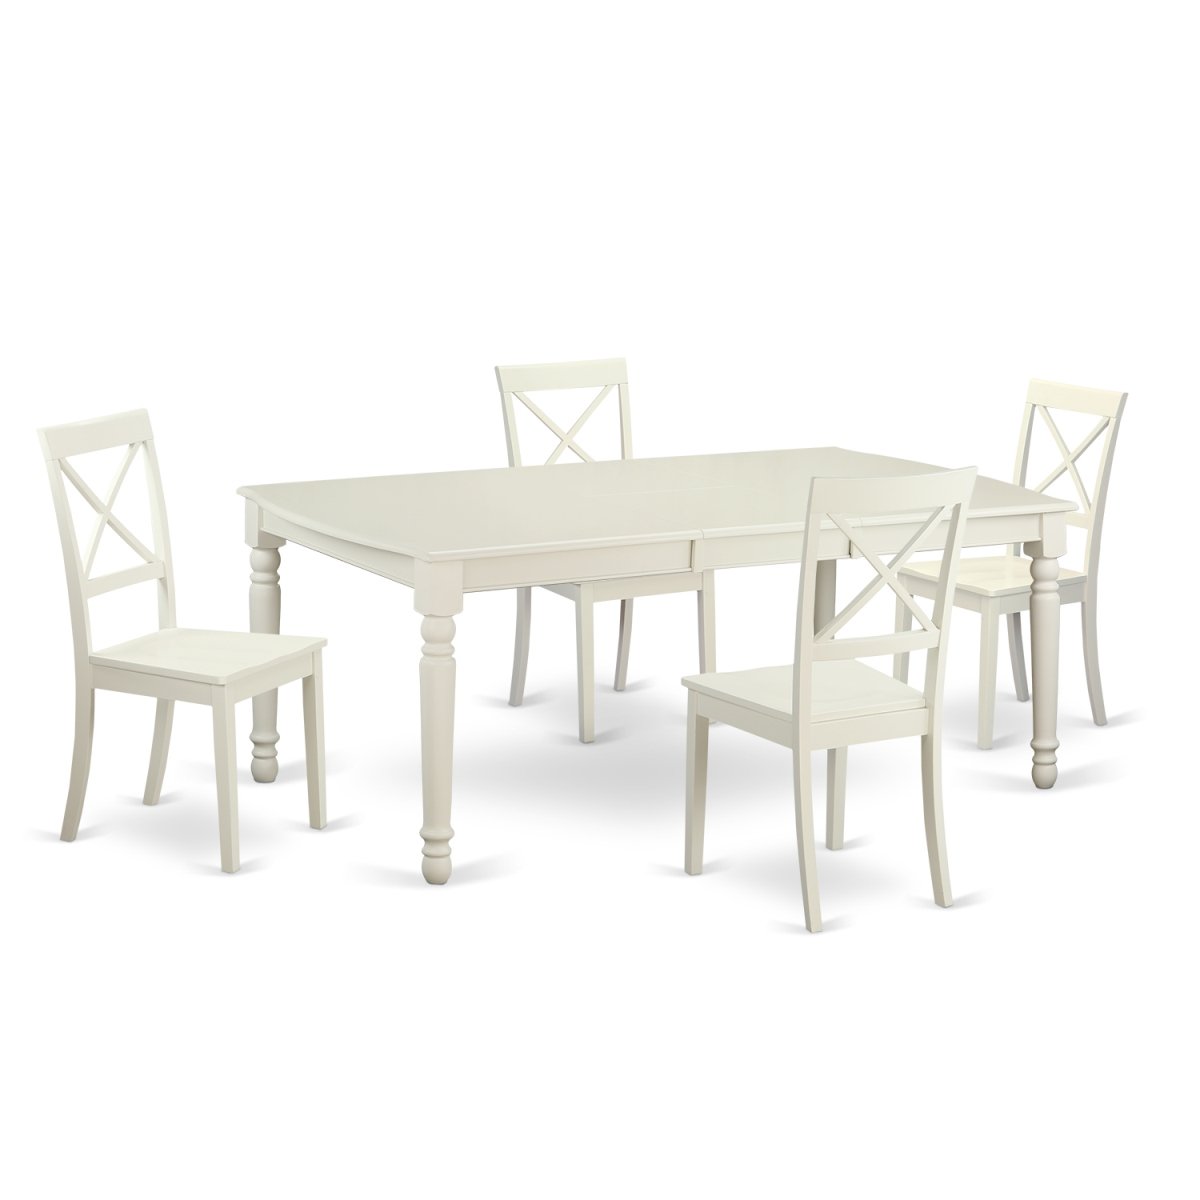 Dobo5-lwh-w Dinette Set - Kitchen Table & 4 Chairs, Linen White - 5 Piece